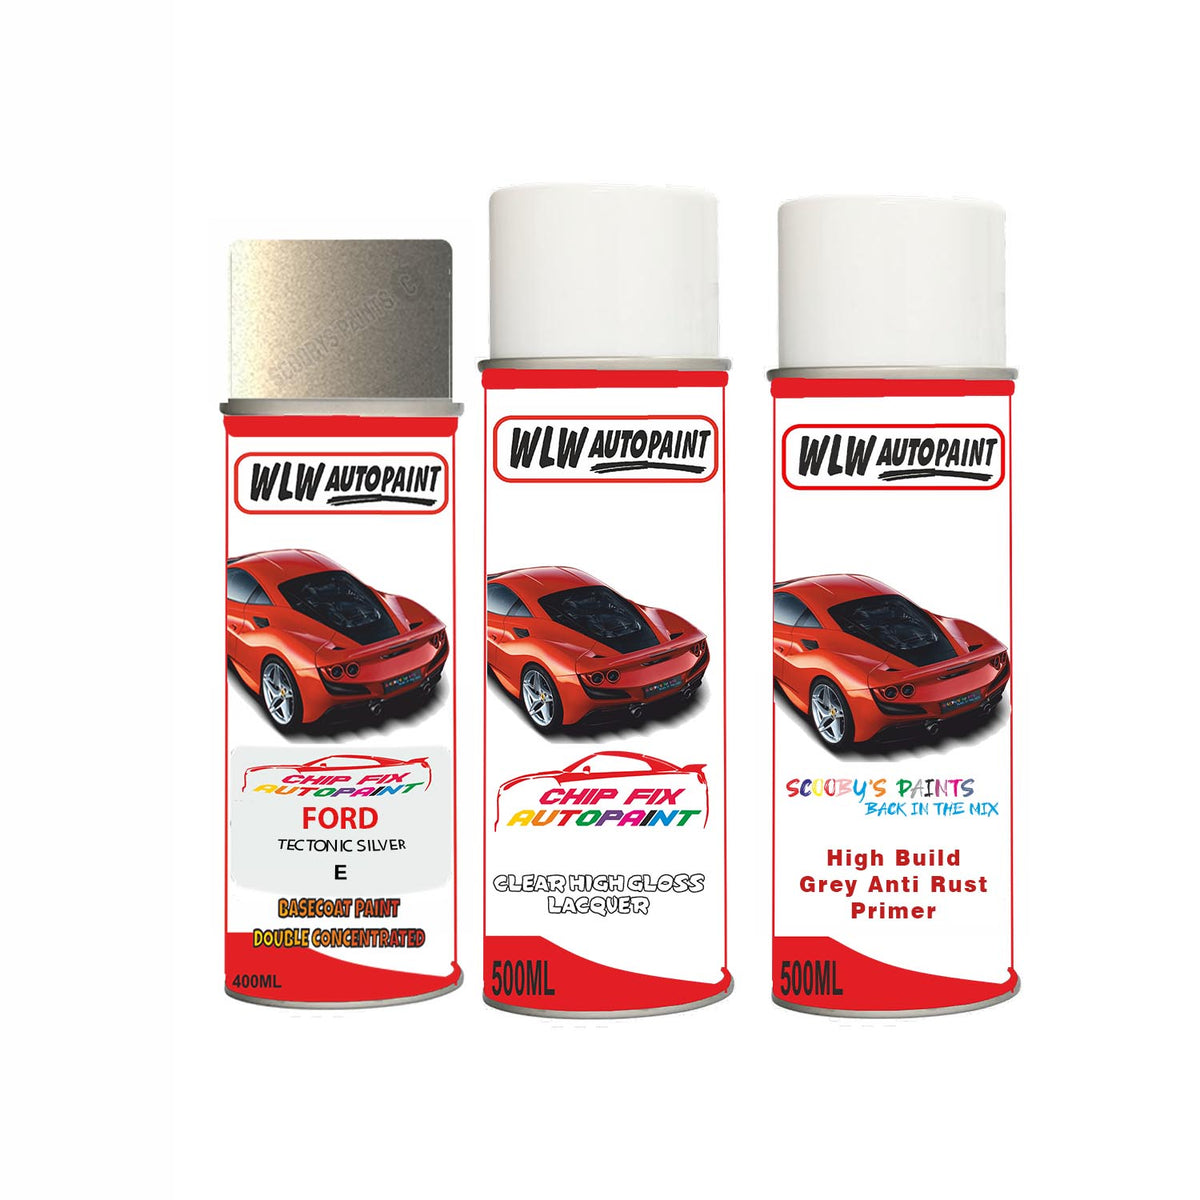 Ford Tectonic Silver Paint Code E Aerosol Spray Paint – Car Touch Up ...